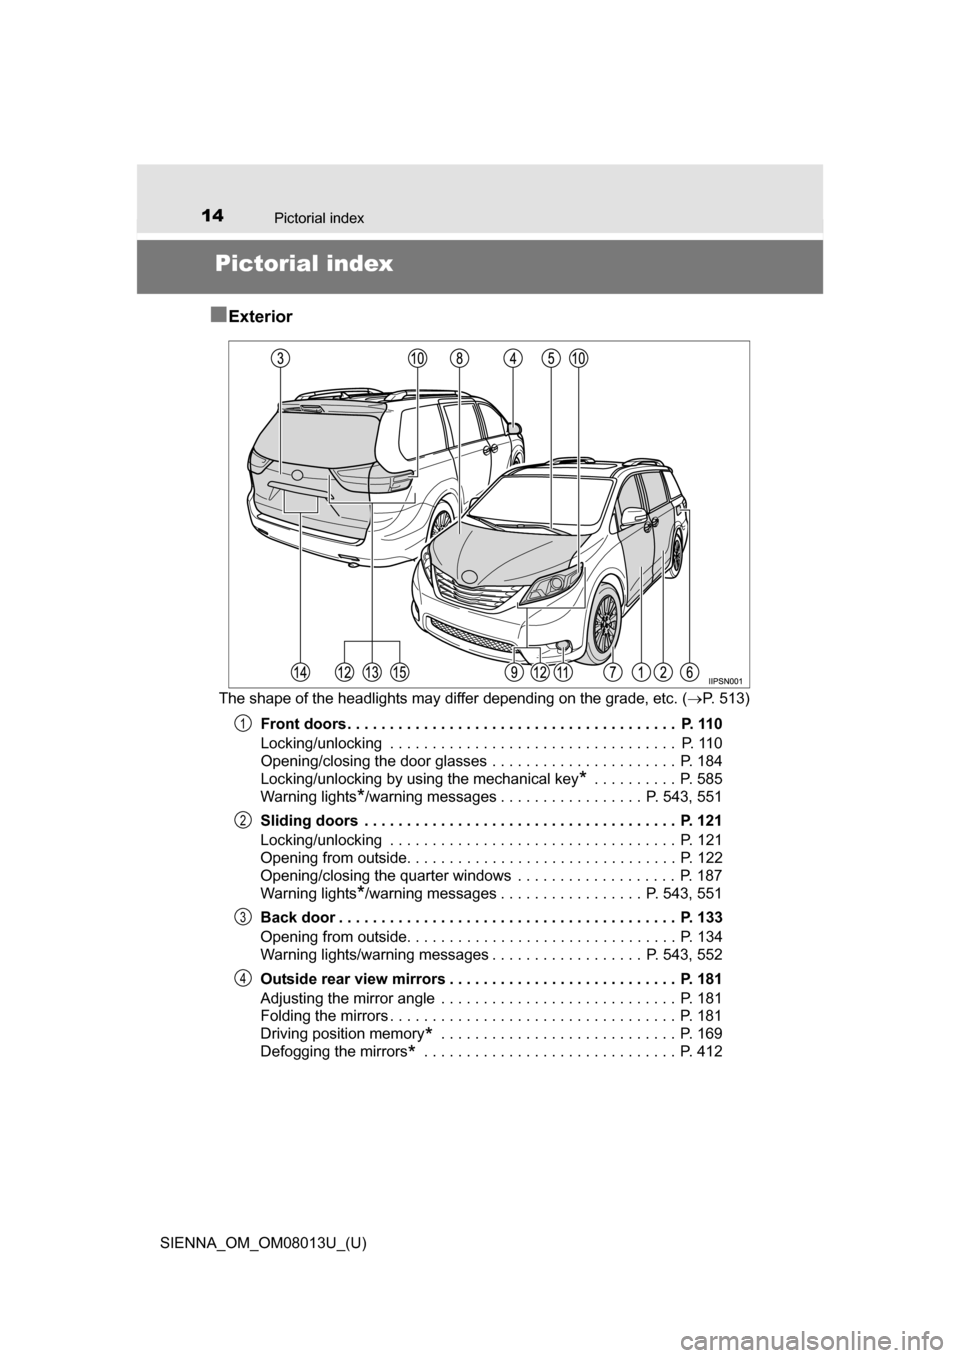 TOYOTA SIENNA 2016 XL30 / 3.G User Guide 14Pictorial index
SIENNA_OM_OM08013U_(U)
Pictorial index
■
Exterior
The shape of the headlights may differ depending on the grade, etc. ( P. 513)
Front doors. . . . . . . . . . . . . . . . . . . 